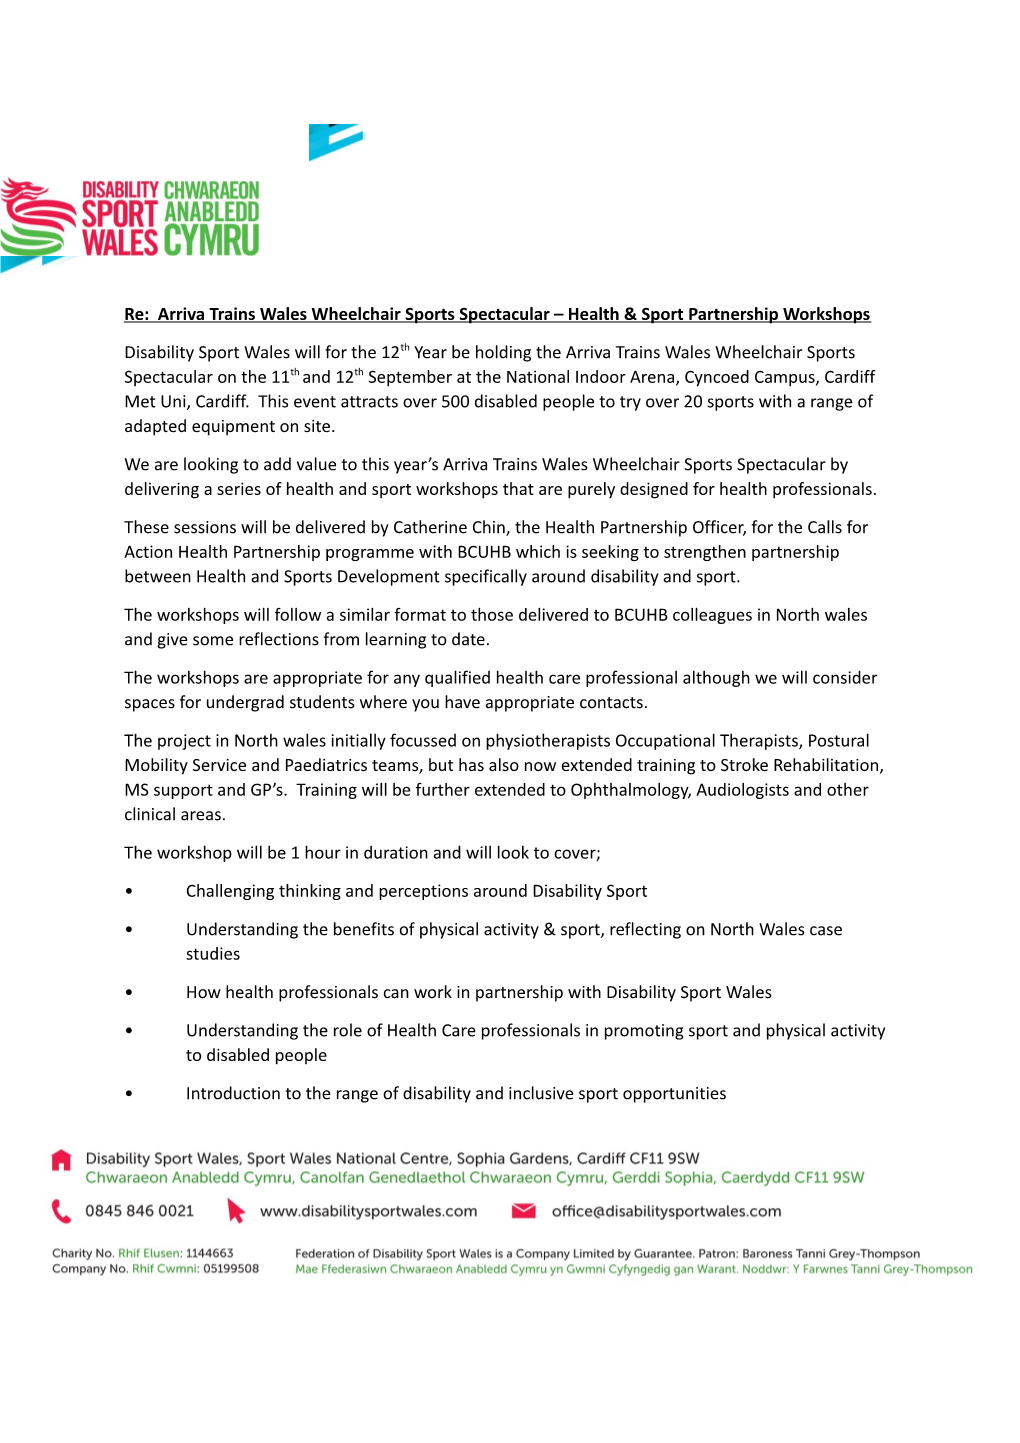 Re: Arriva Trains Wales Wheelchair Sports Spectacular Health & Sport Partnership Workshops